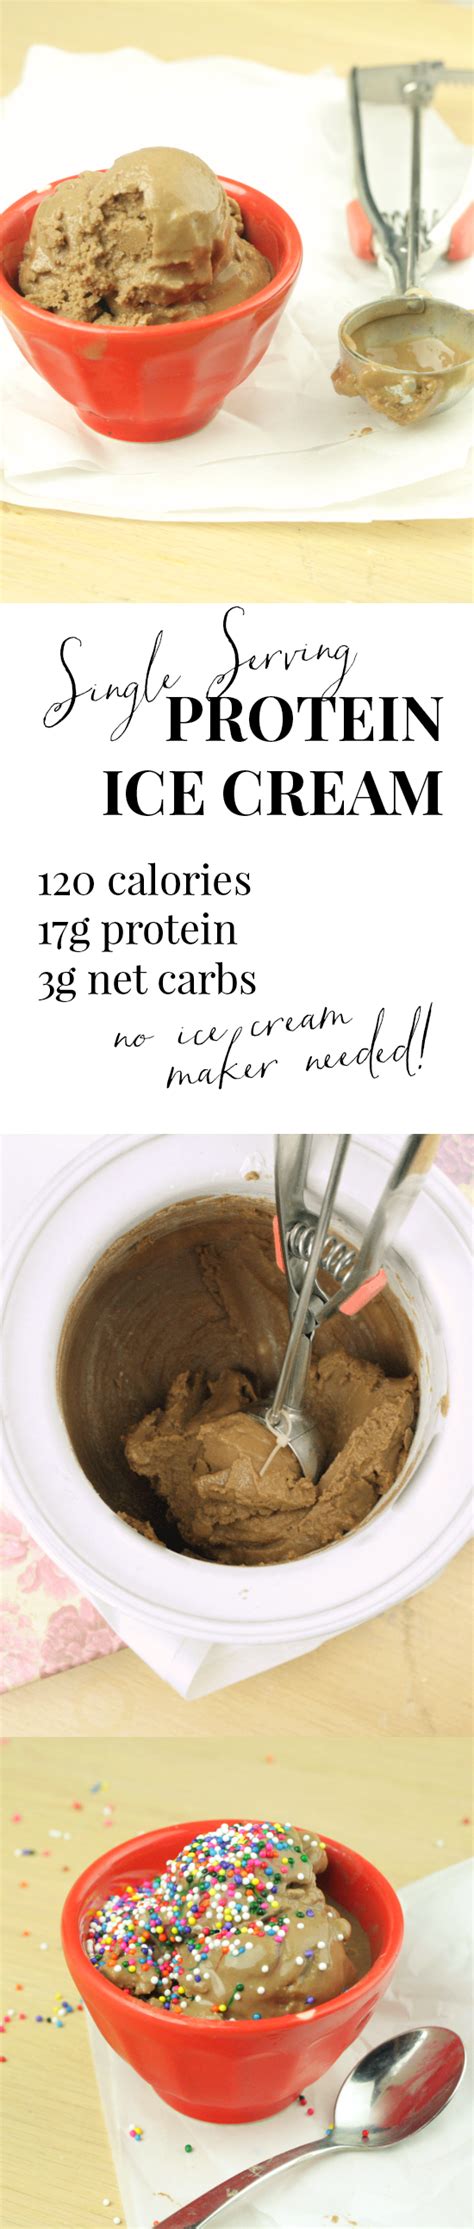 About 200 calories, 17g protein for the strawberry version! Protein Ice Cream | Recipe | Protein ice cream, Low carb ...